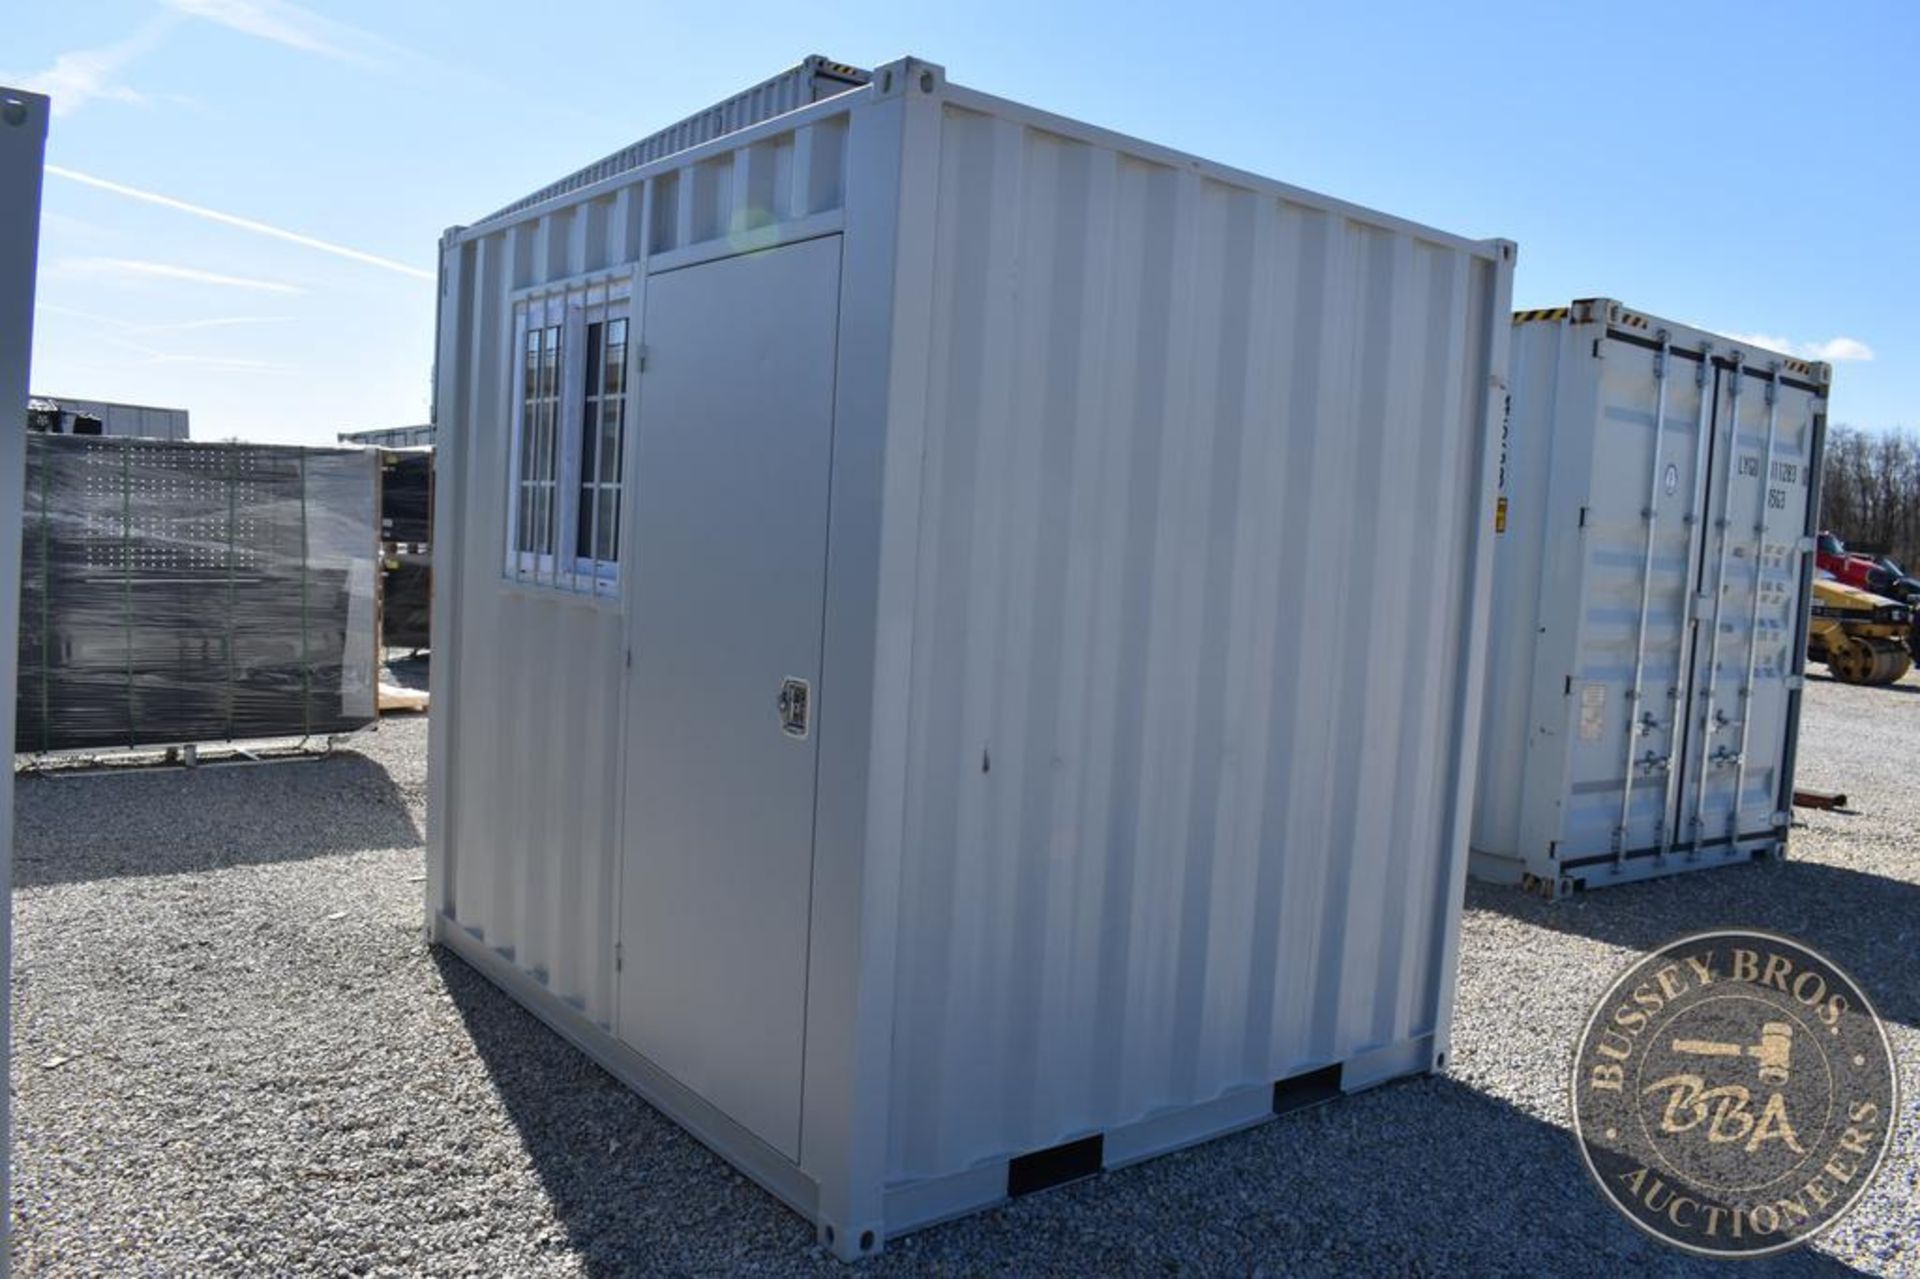 SUIHE 9FT MOBILE CONTAINER 27171 - Image 6 of 13